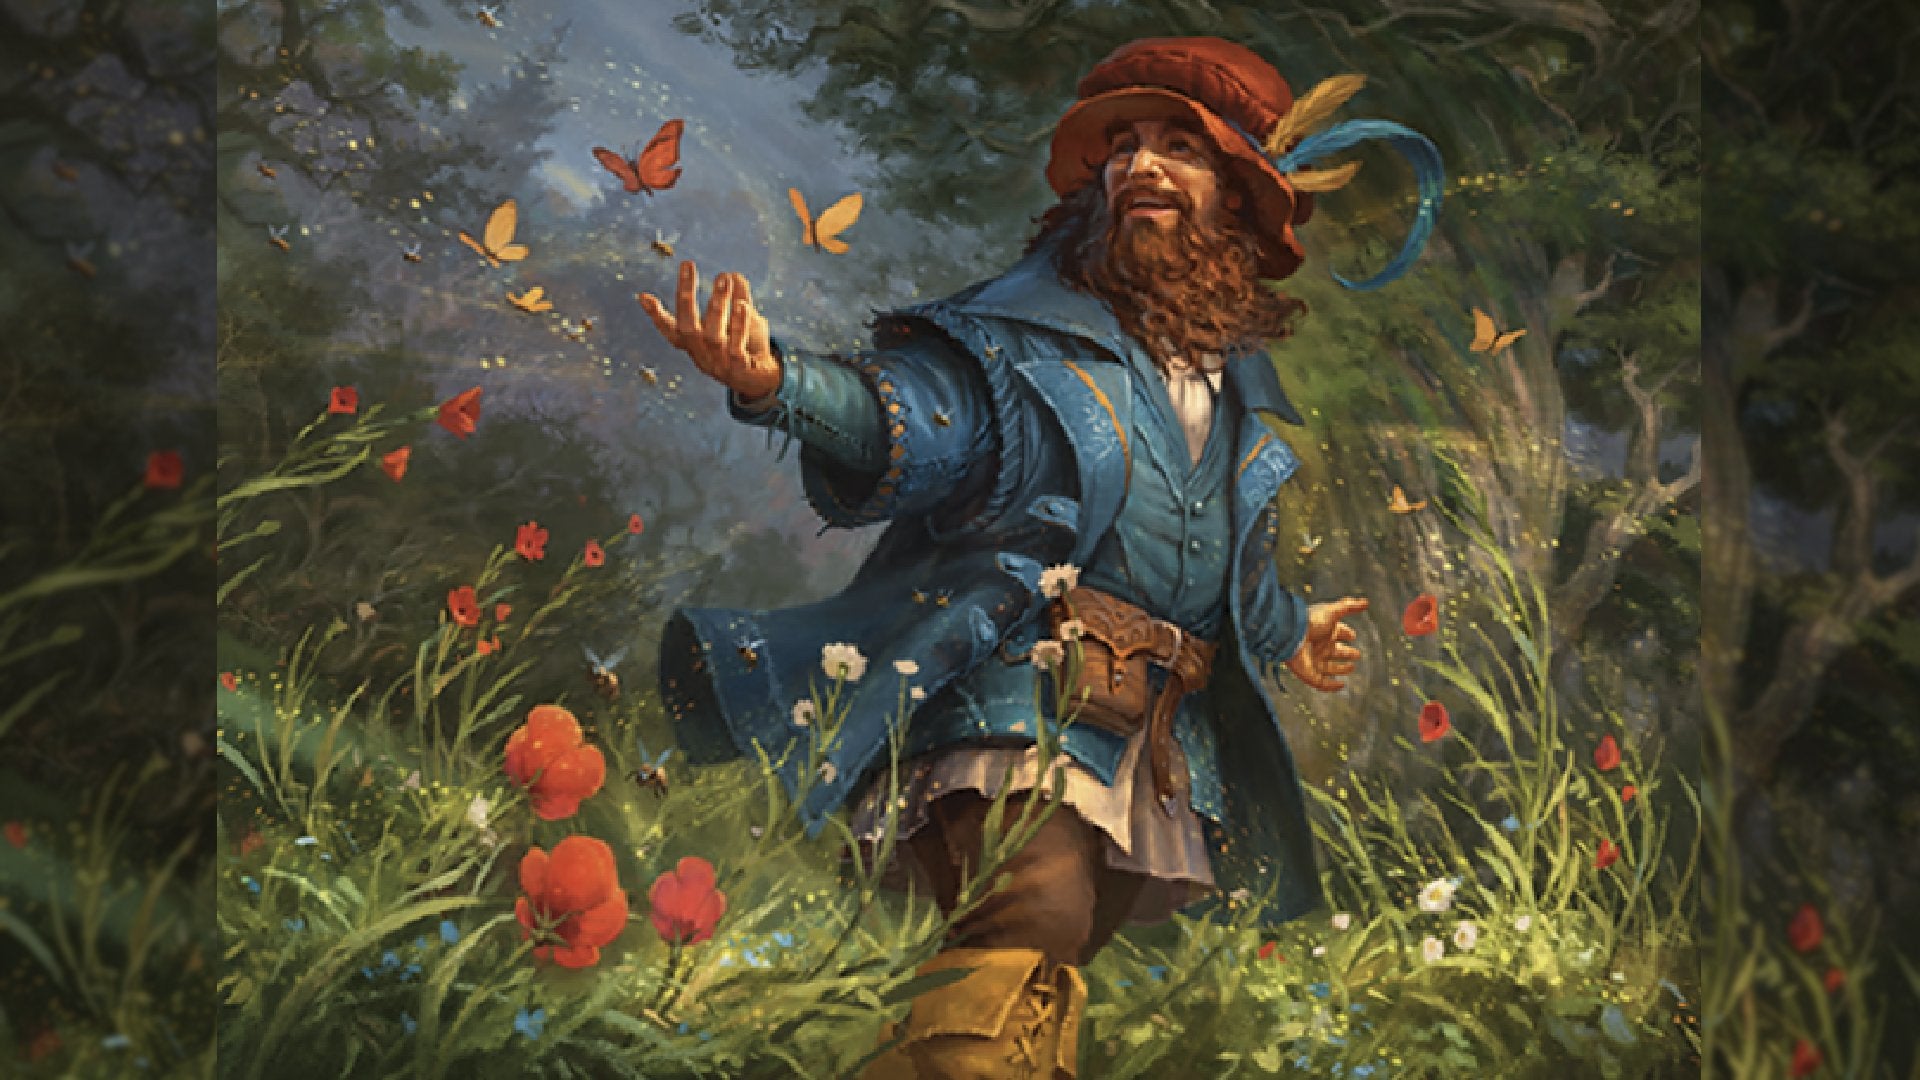 Art from the Tom Bombadil card in MTG. Tom Bombadil is in a lush forest and is smiling.